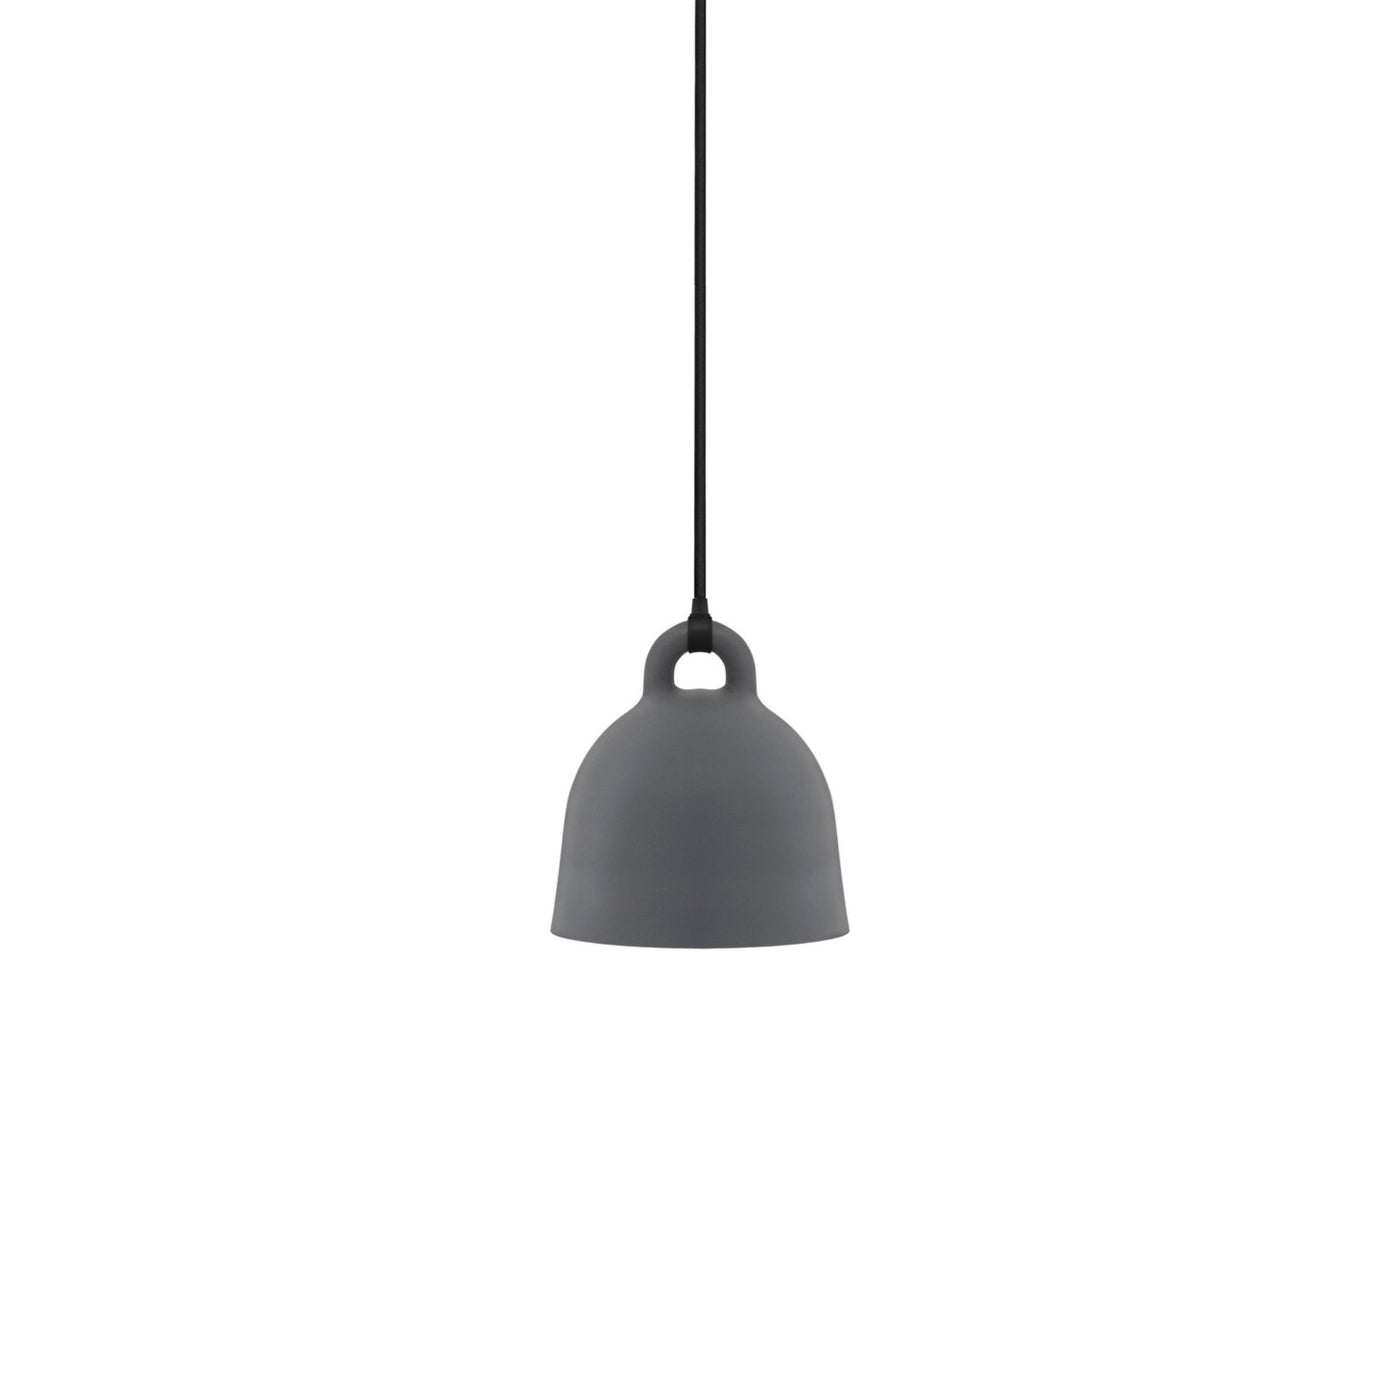 Norman Copenhagen Bell Pendant Lamp in grey. Free UK delivery from someday designs #size_extra-small